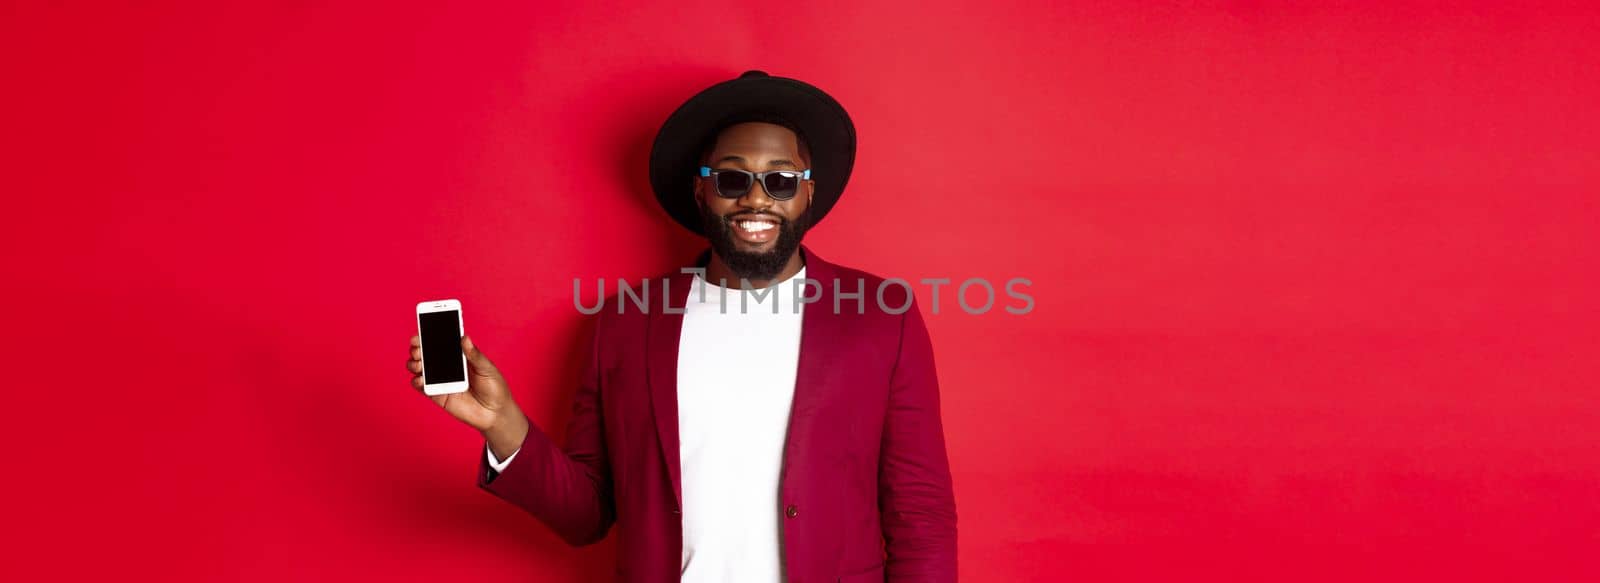 Handsome and stylish Black man showing phone screen at camera, recommending online store or application, standing over red background.